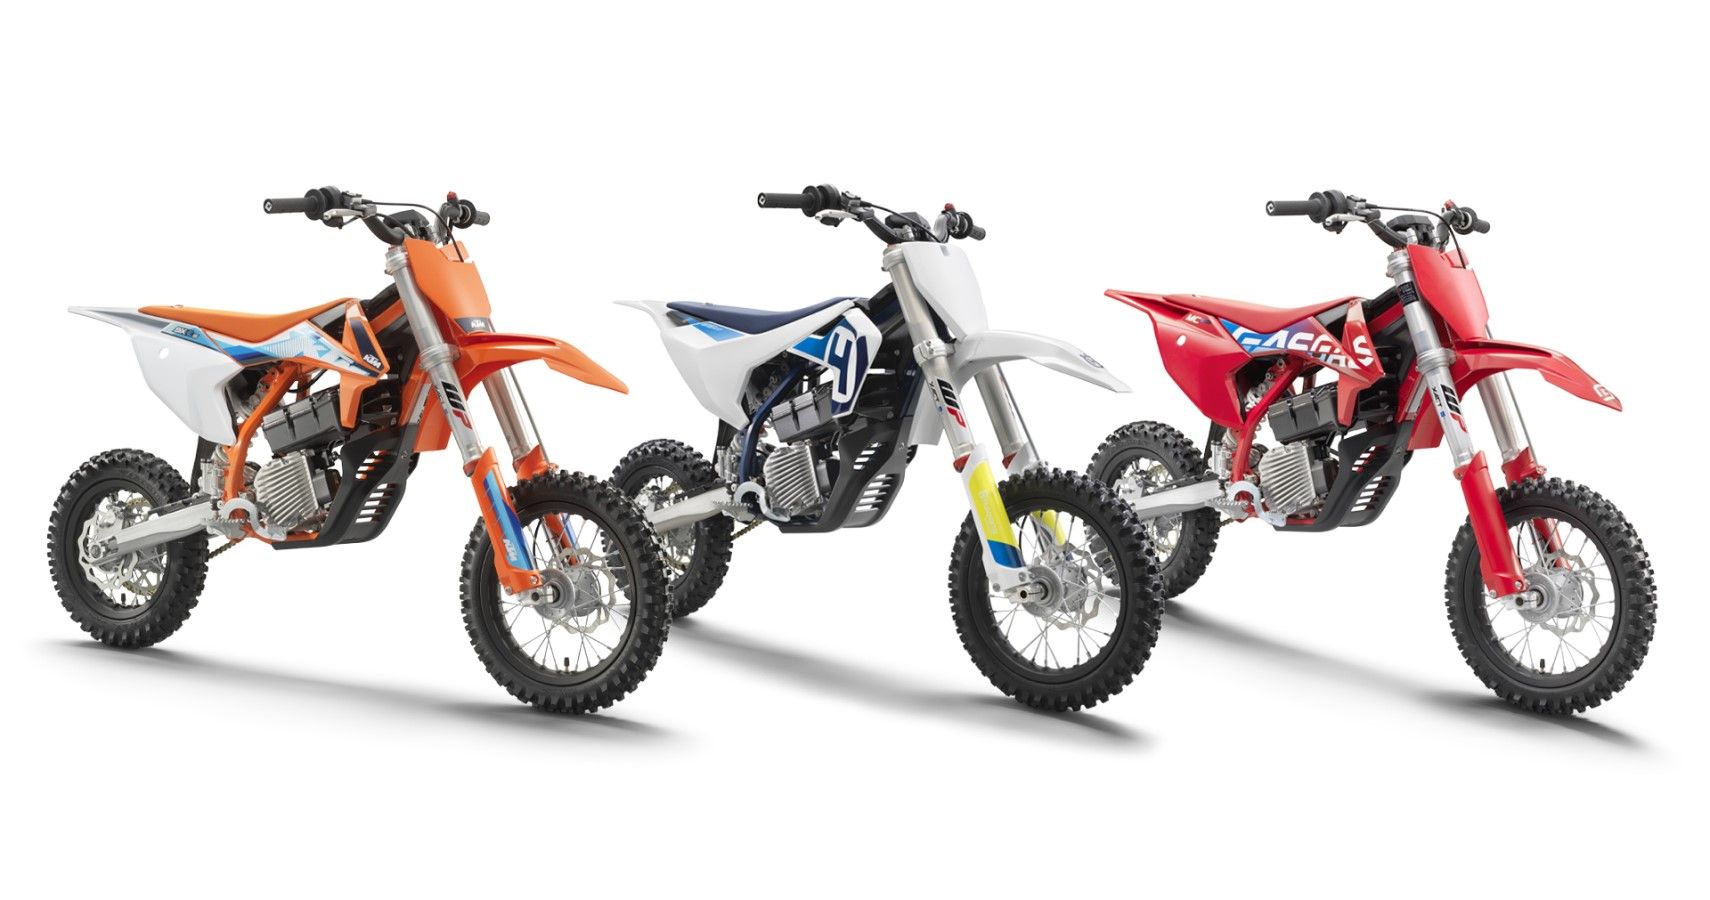 KTM-AG Debuts 2023 SX-E 5, EE 5 and MC-E 5 models from KTM, Husqvarna Motorcycles and GASGAS, respectively.